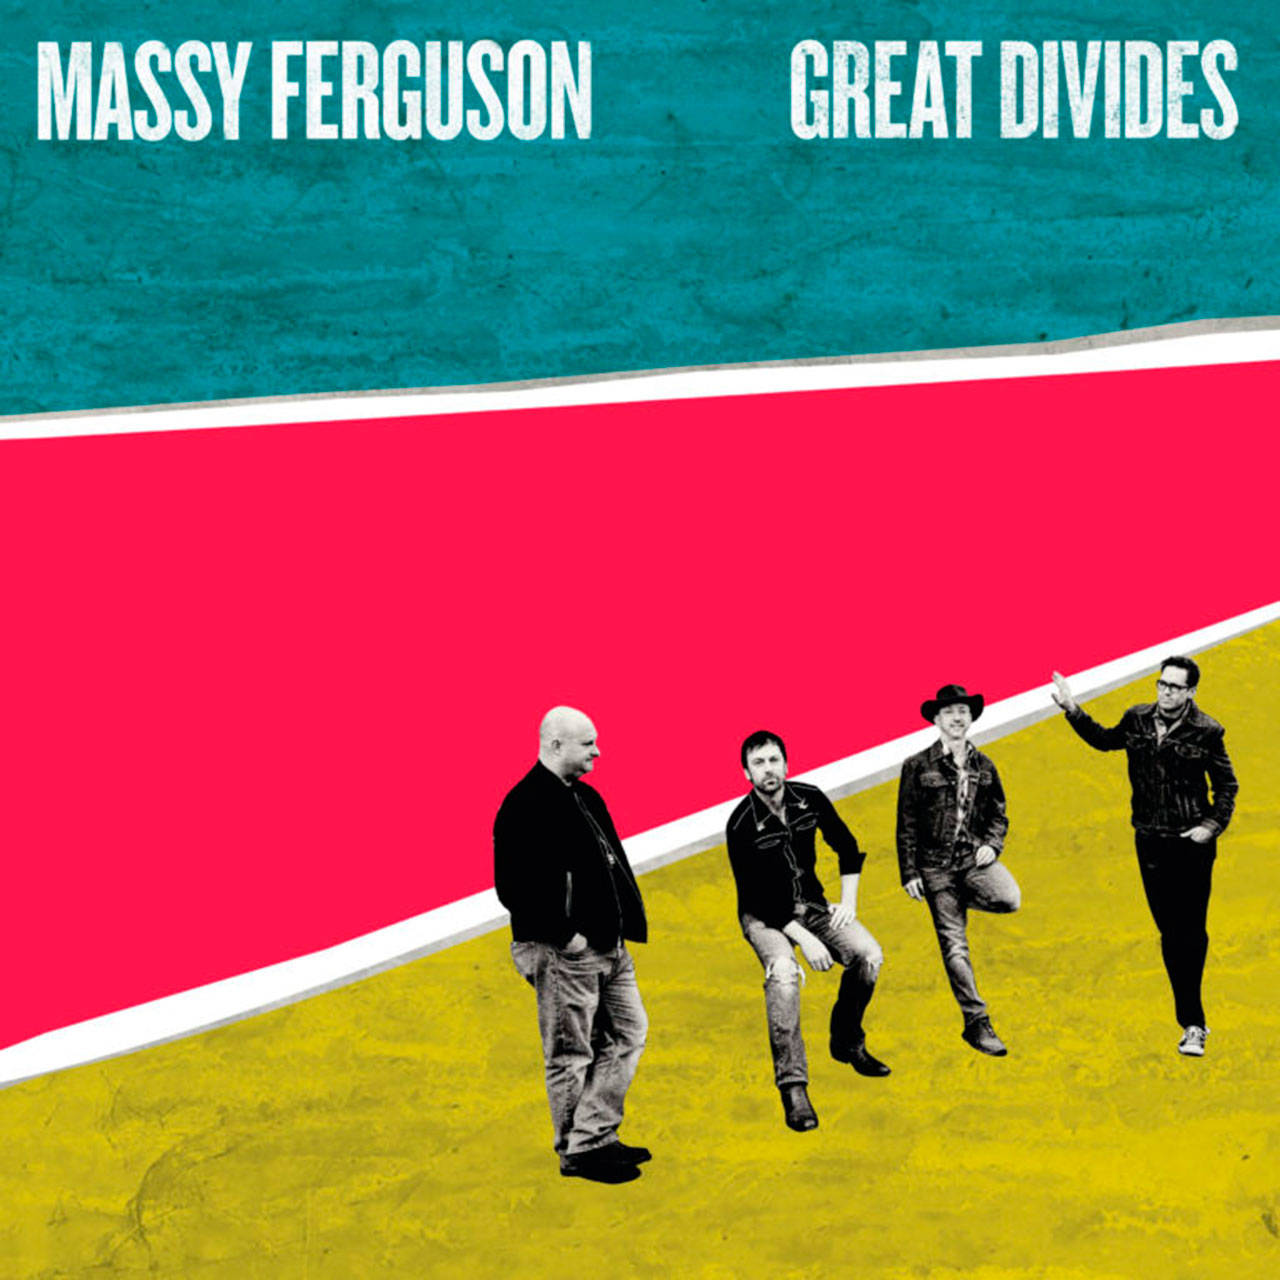 Image courtesy of the Treehouse Café | Massy Ferguson will host a release party for their newest album, “Great Divides,” at 8 p.m. Saturday, May 11 at the Treehouse Café.